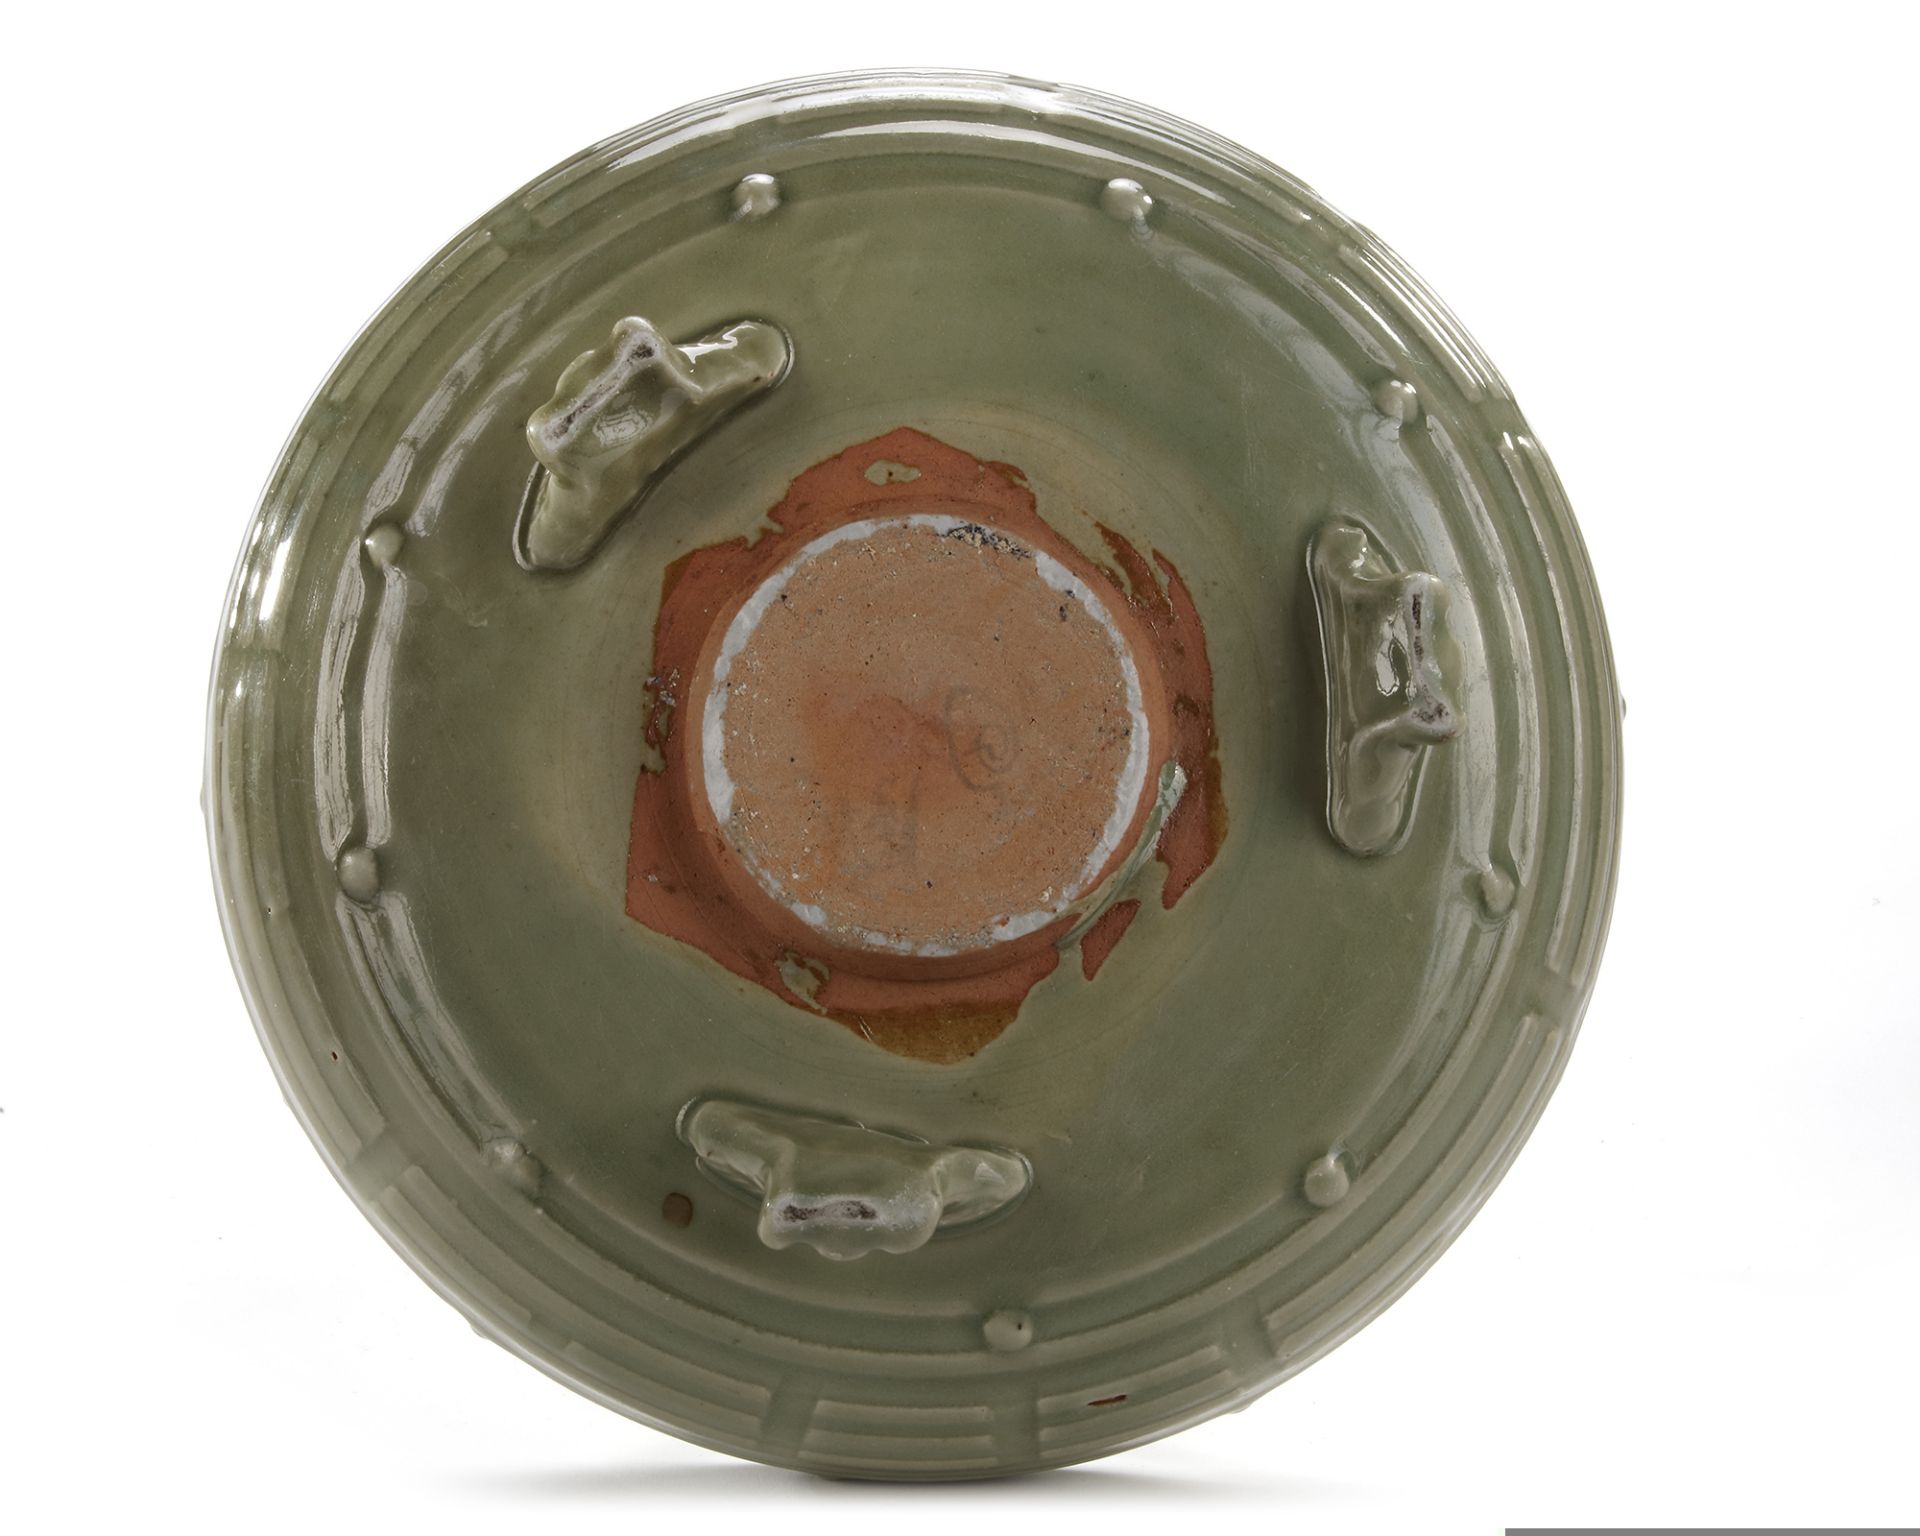 A CHINESE LONGQUAN CELADON 'EIGHT TRIGRAMS' TRIPOD CENSER LATE YUAN/EARLY MING DYNASTY (13TH-14TH CE - Image 4 of 4